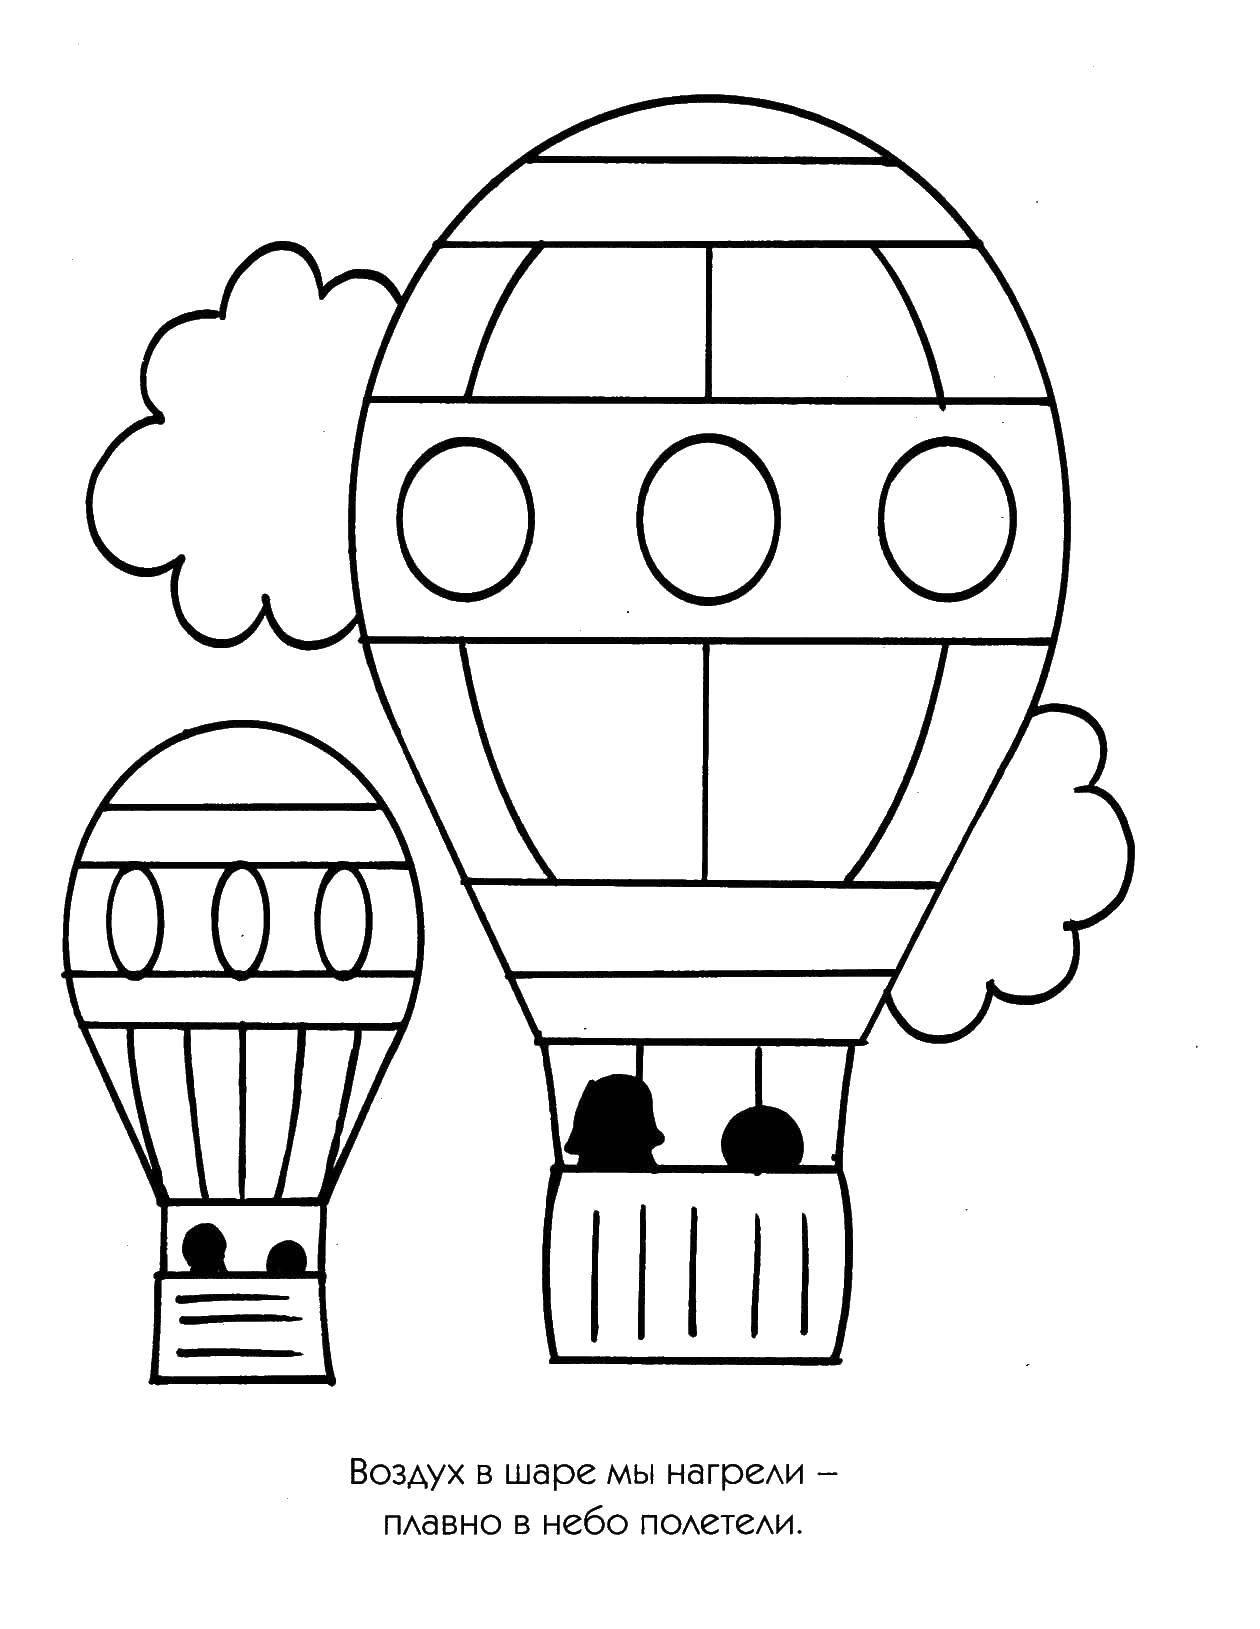 Coloring People in a balloon. Category aircraft. Tags:  balloon.